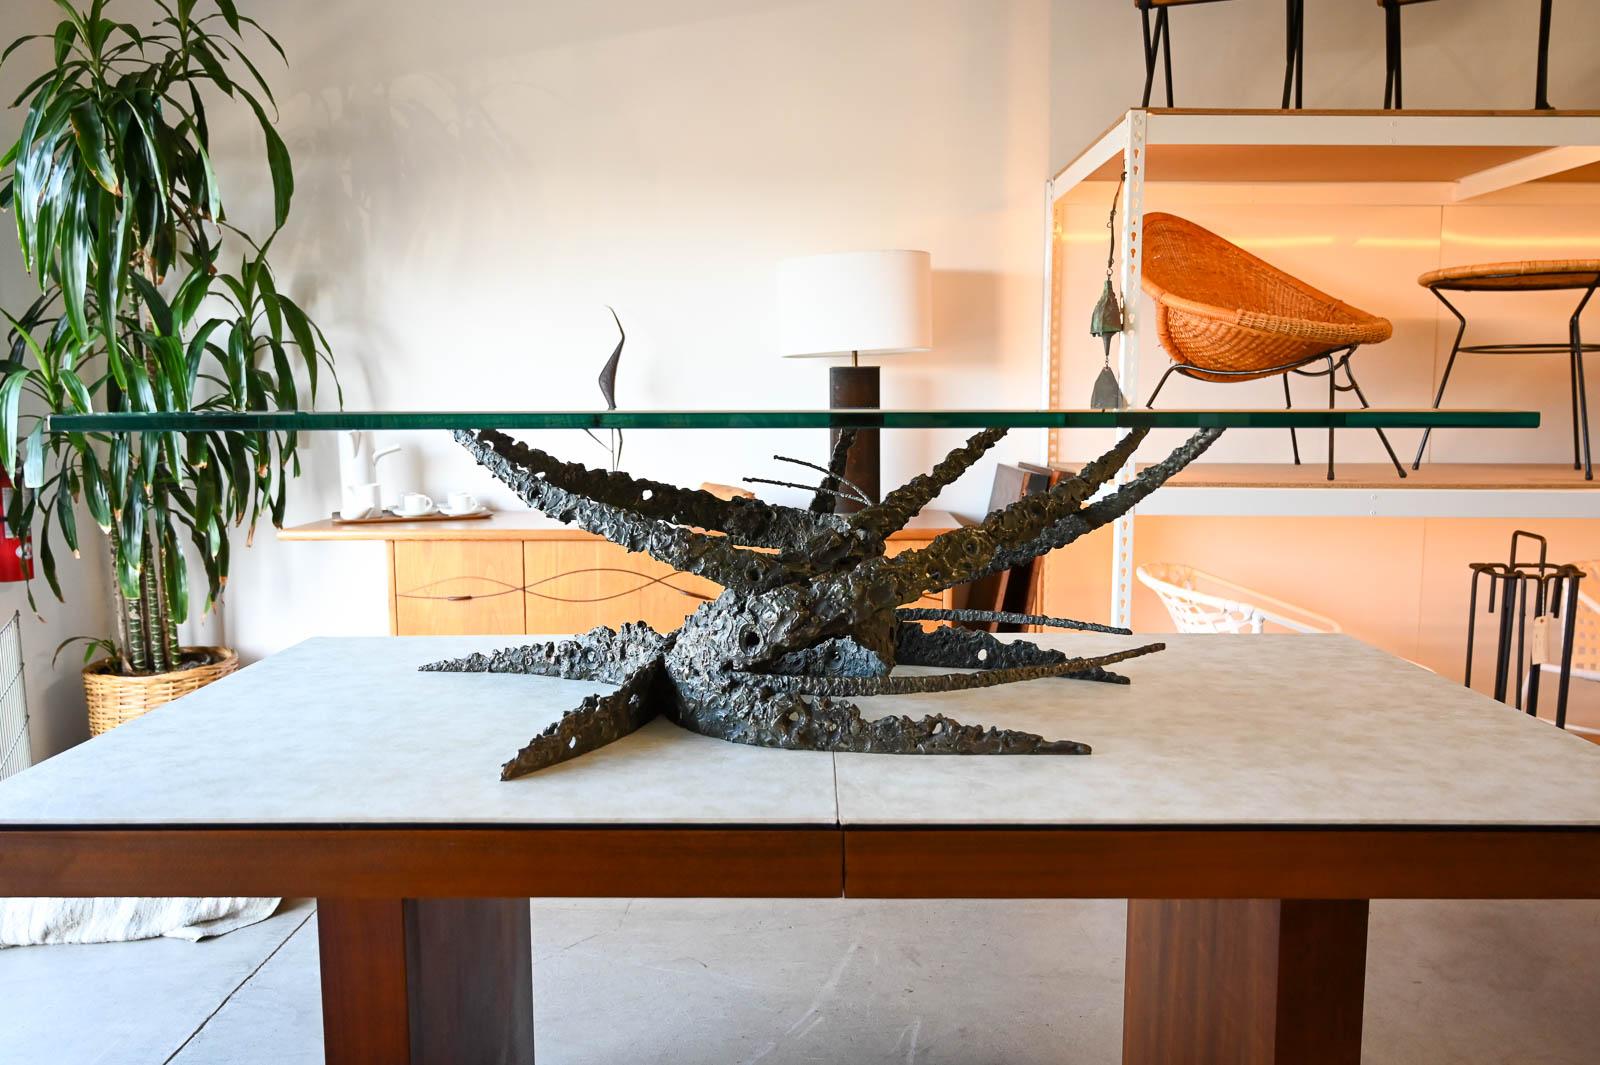 Cast Bronze Sculptural Brutalist Coffee Table by Daniel Gluck, ca. 1970 For Sale 8